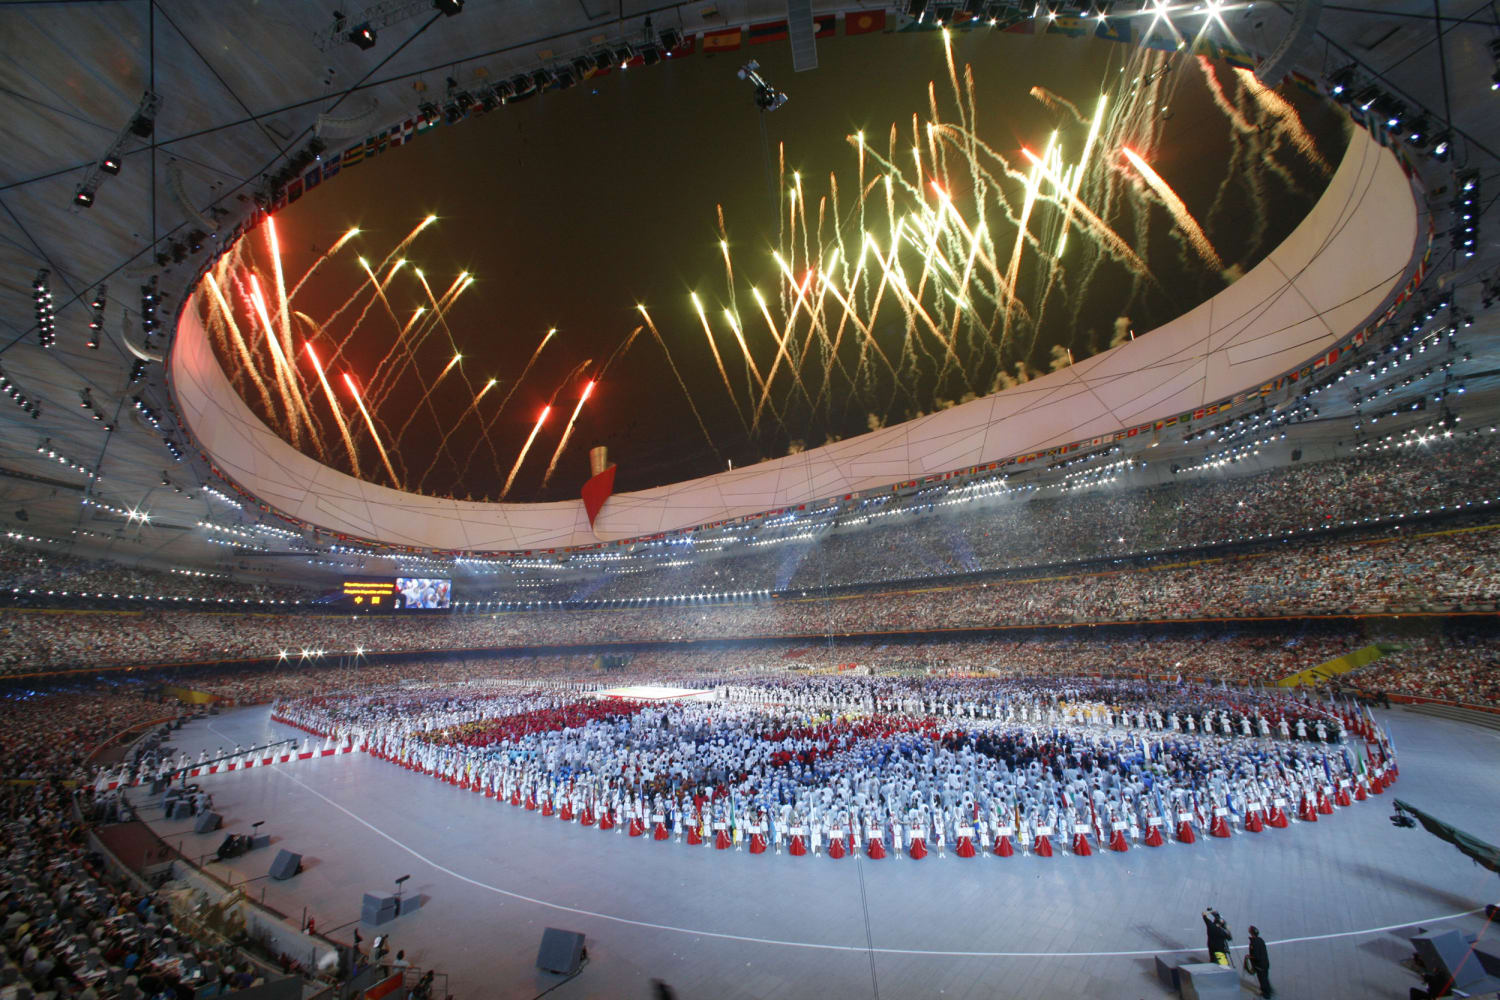 Fears China will play games with the 2022 Winter Olympics